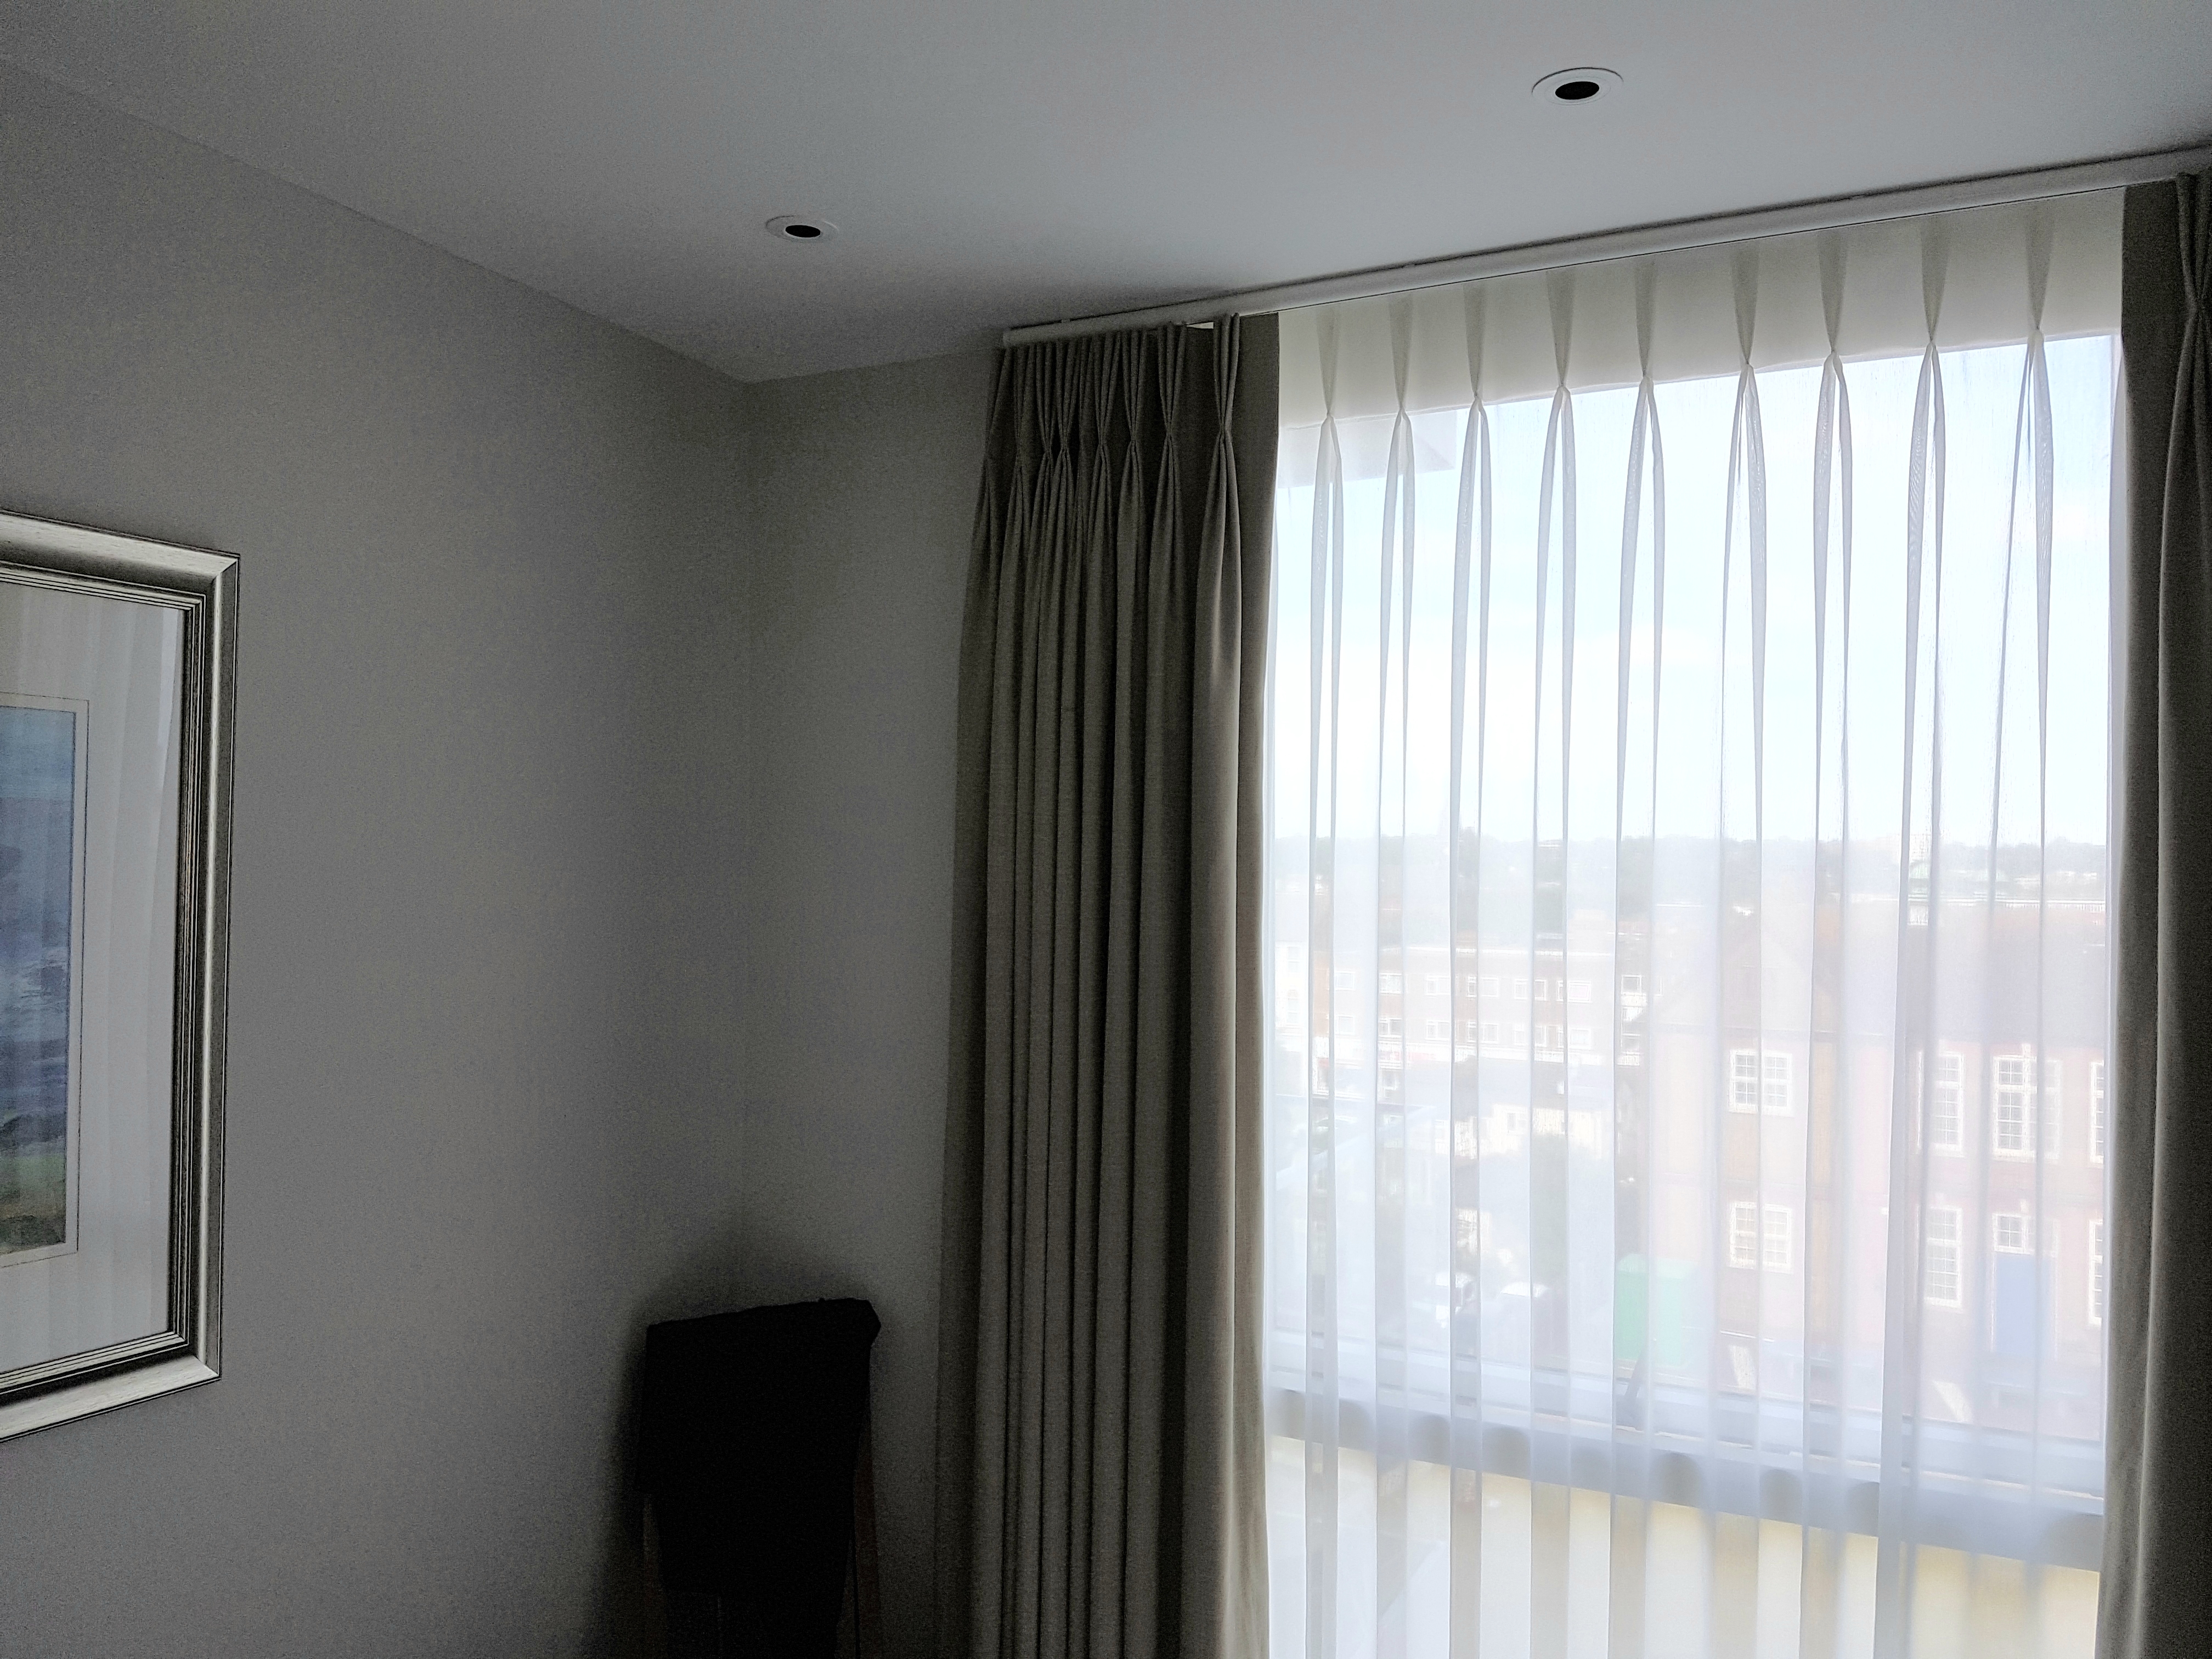 Bespoke Curtains, cotton fabric curtains lined and sheer curtains to track and pole